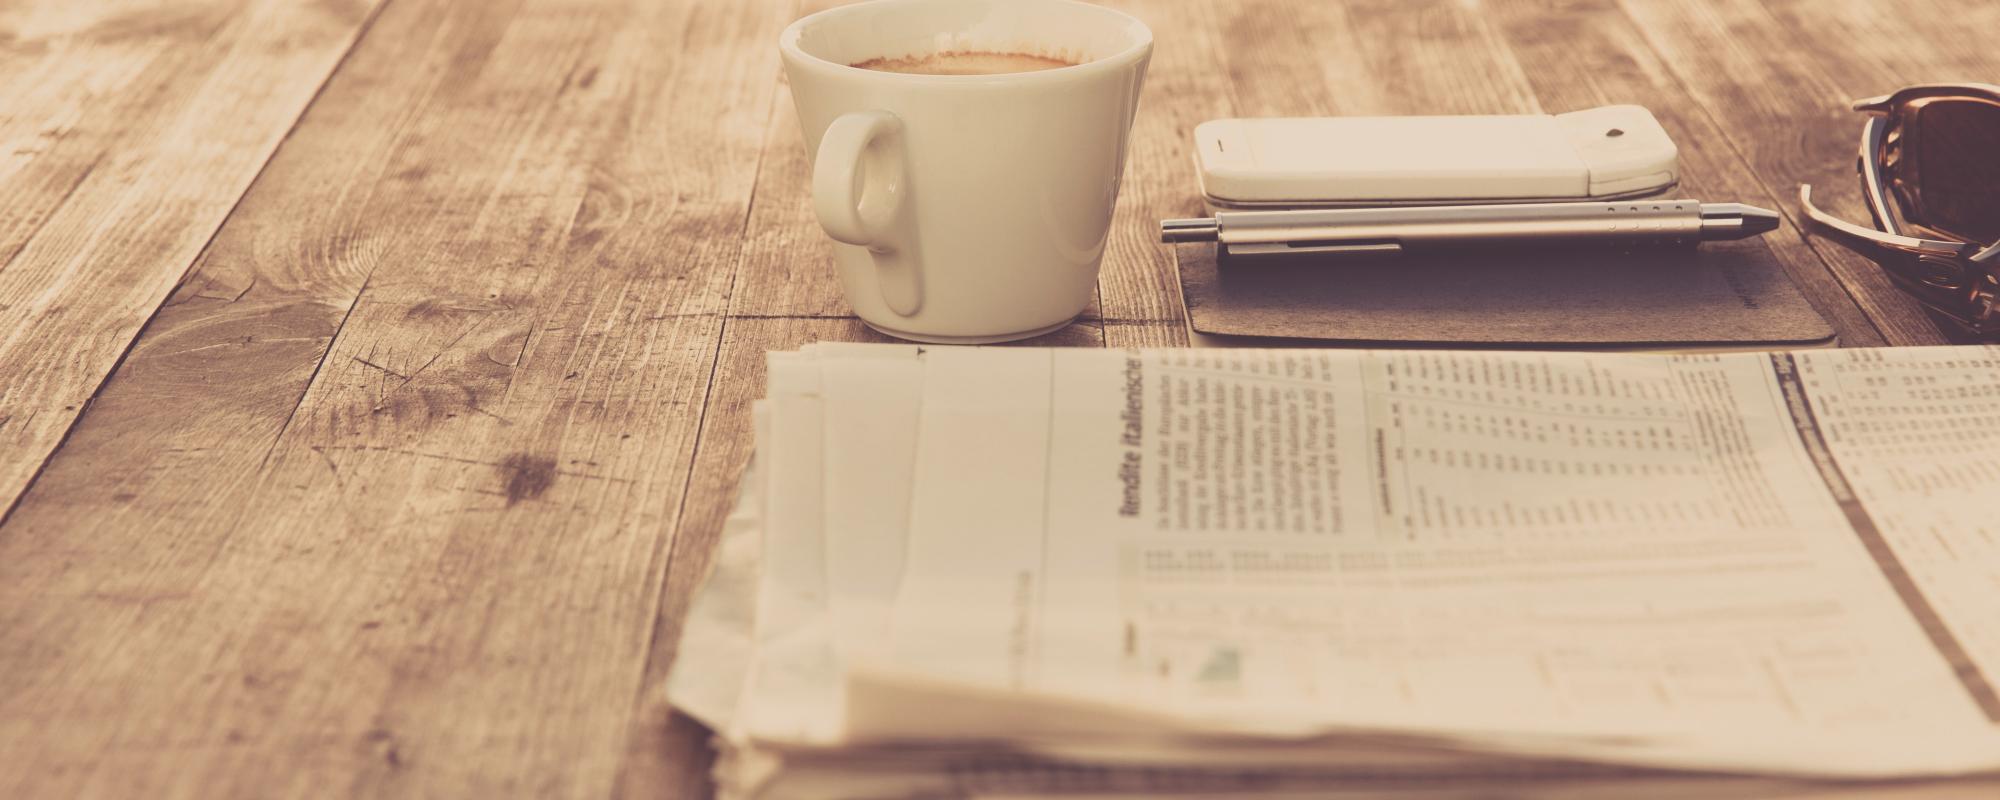 folded newspaper on a desk with a coffee cup, phone and sunglasses